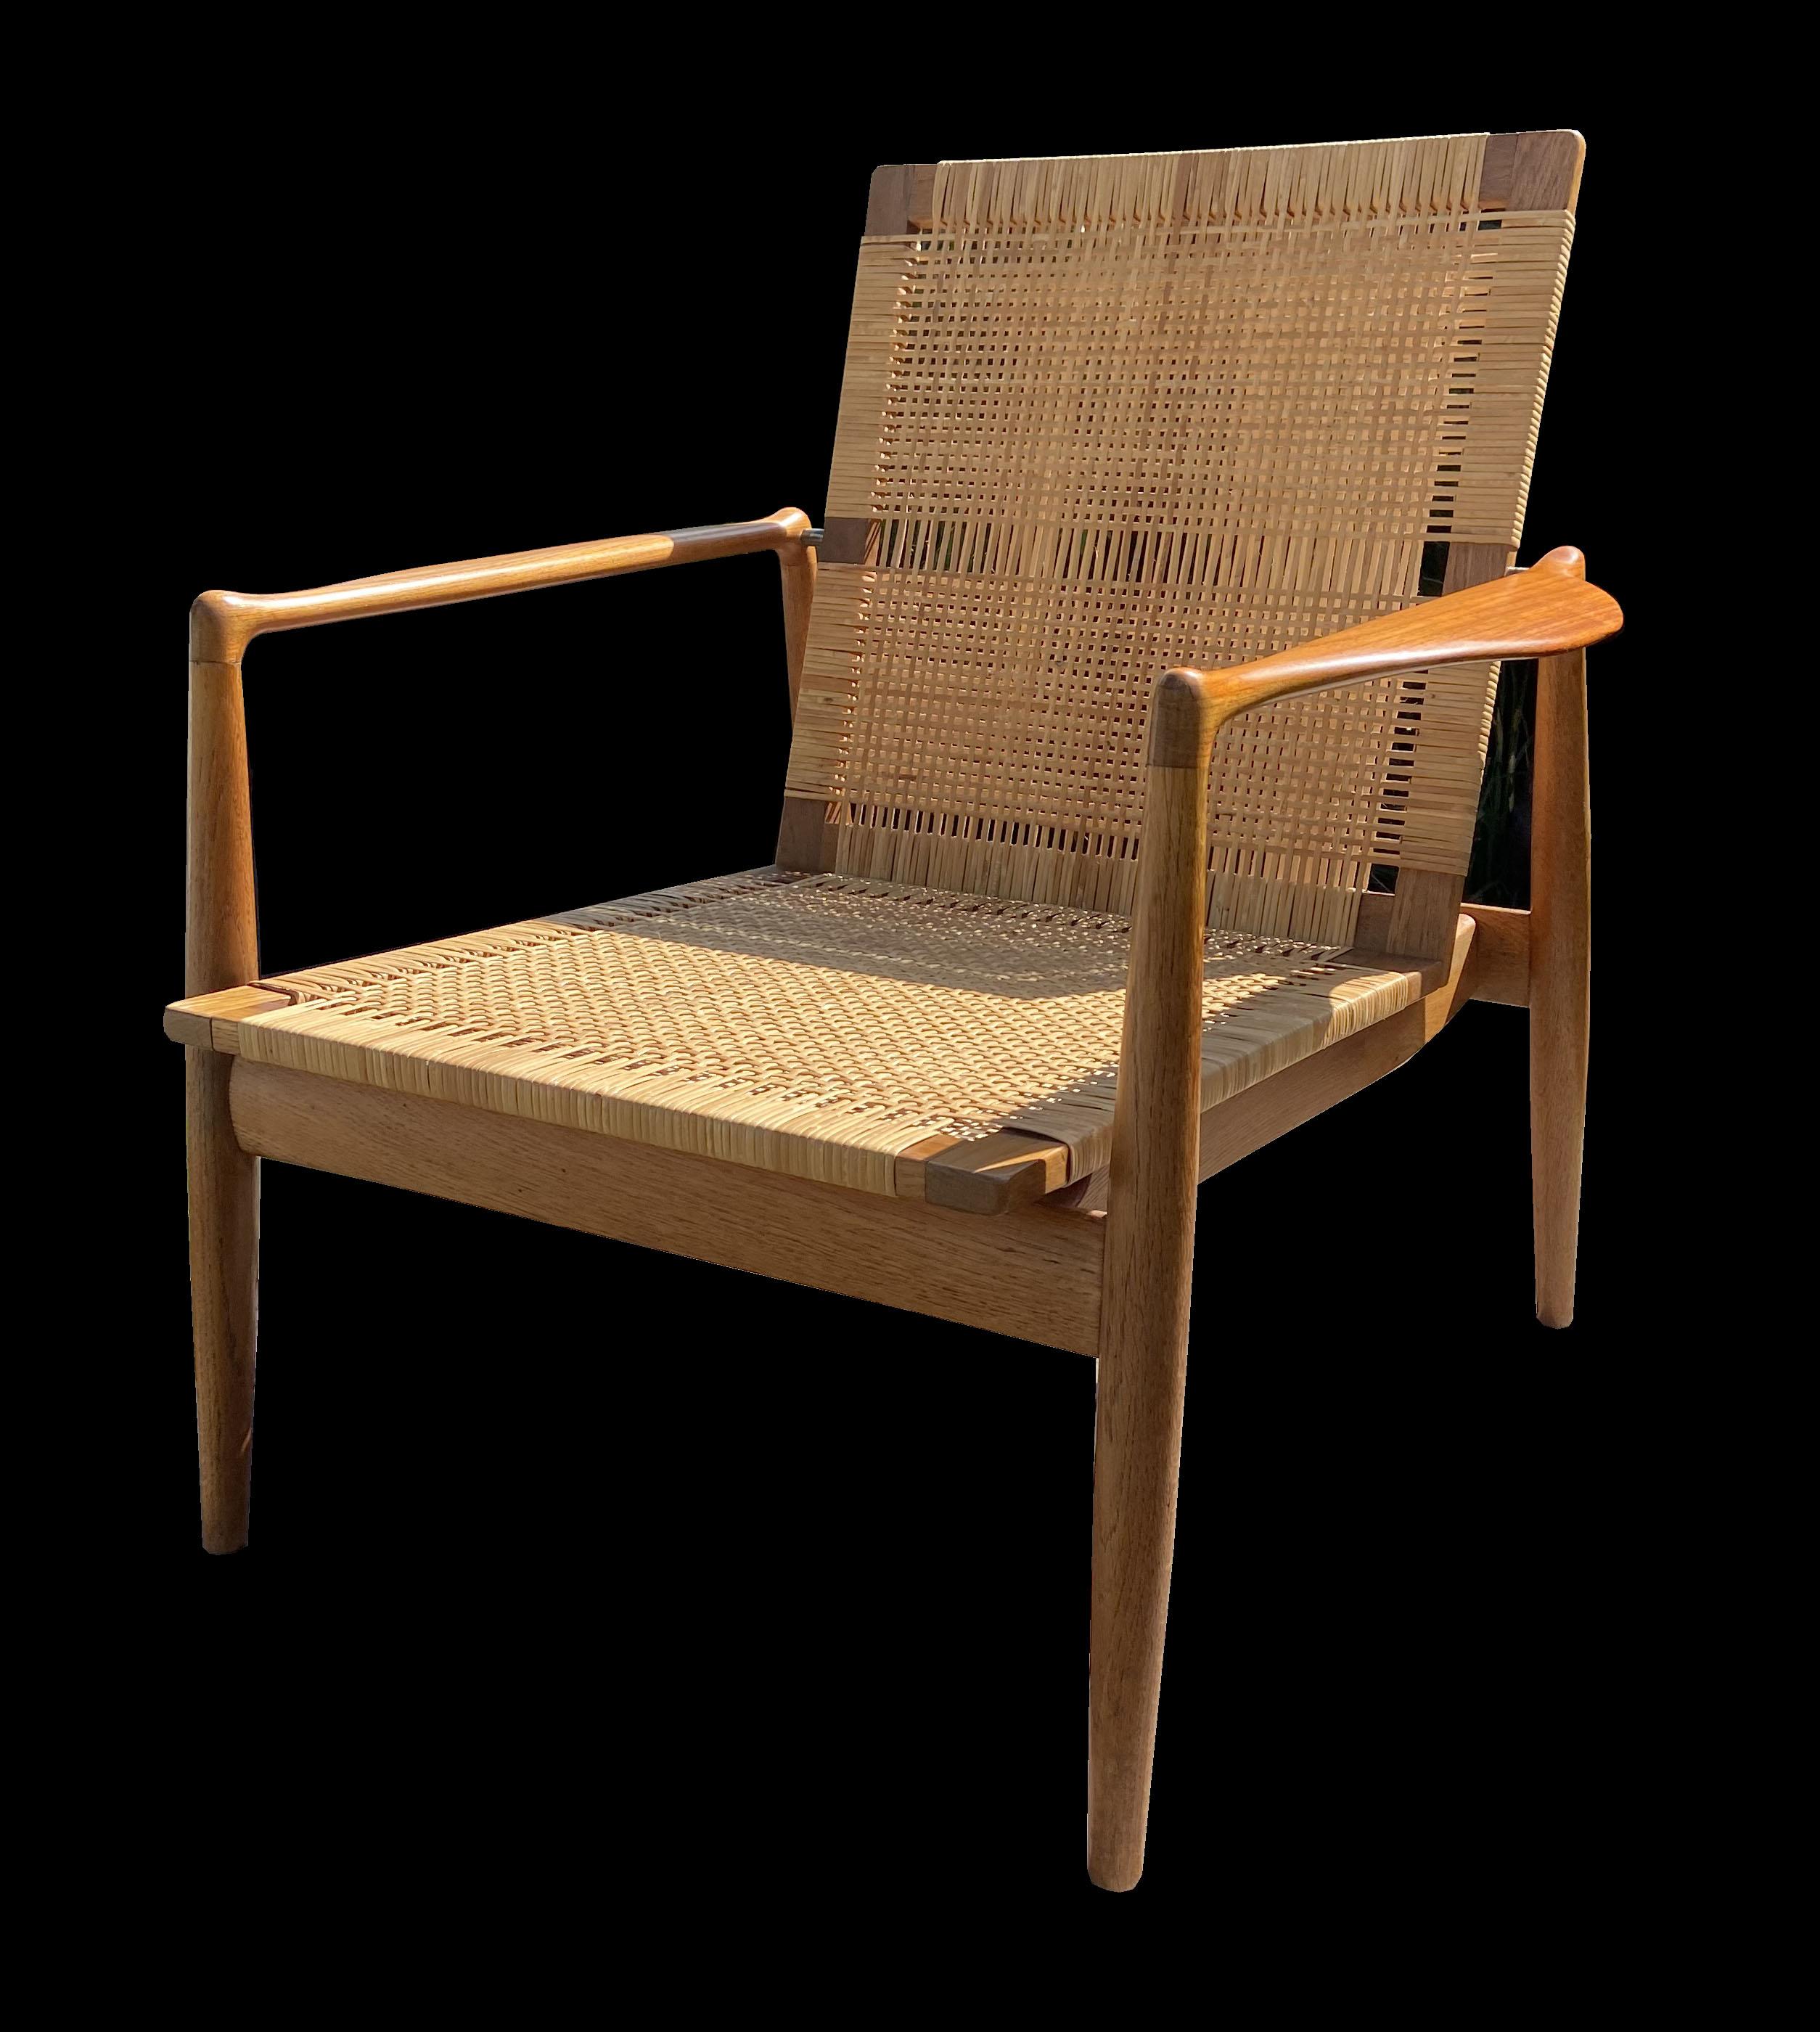 This is a really beautiful original example of this scarce lounge chair, designd by Finn Juhl and produced by Soren Willadsen. The frame of the chair is Oak, the arms are Teak and the seat and back Cane.